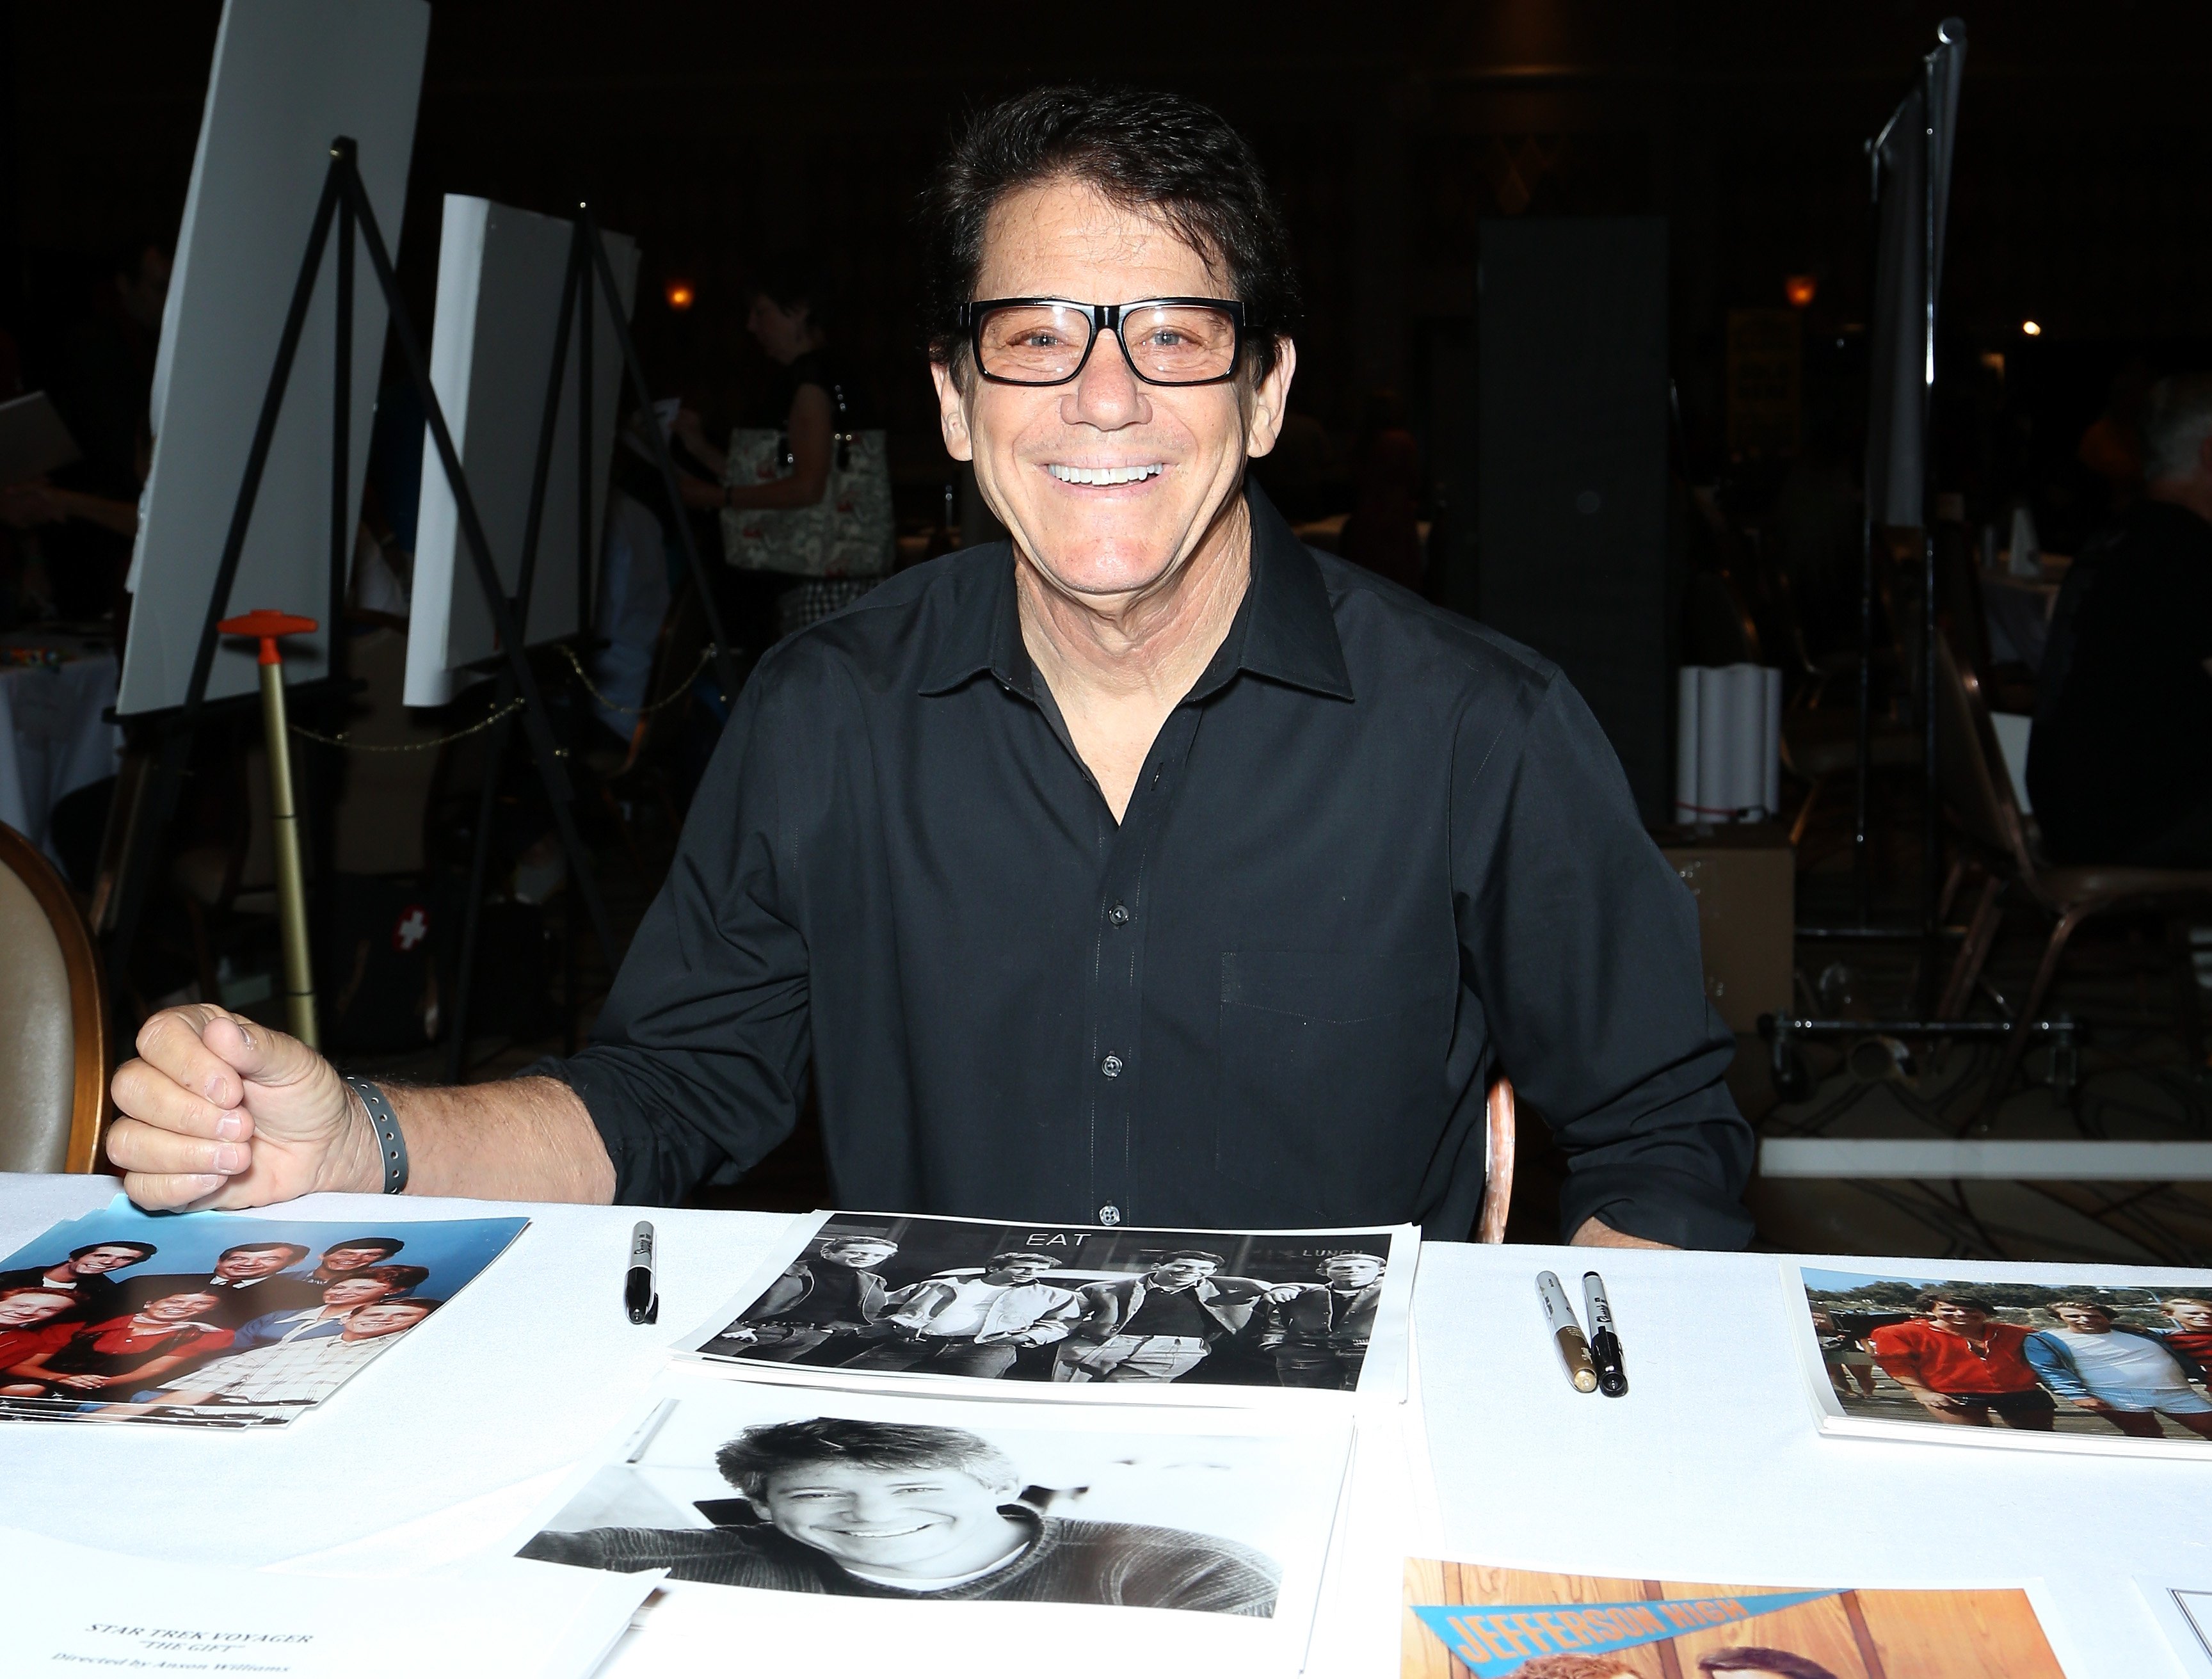 Anson Williams attends the 14th annual official Star Trek convention at the Rio Hotel & Casino on August 6, 2015 | Photo: GettyImages